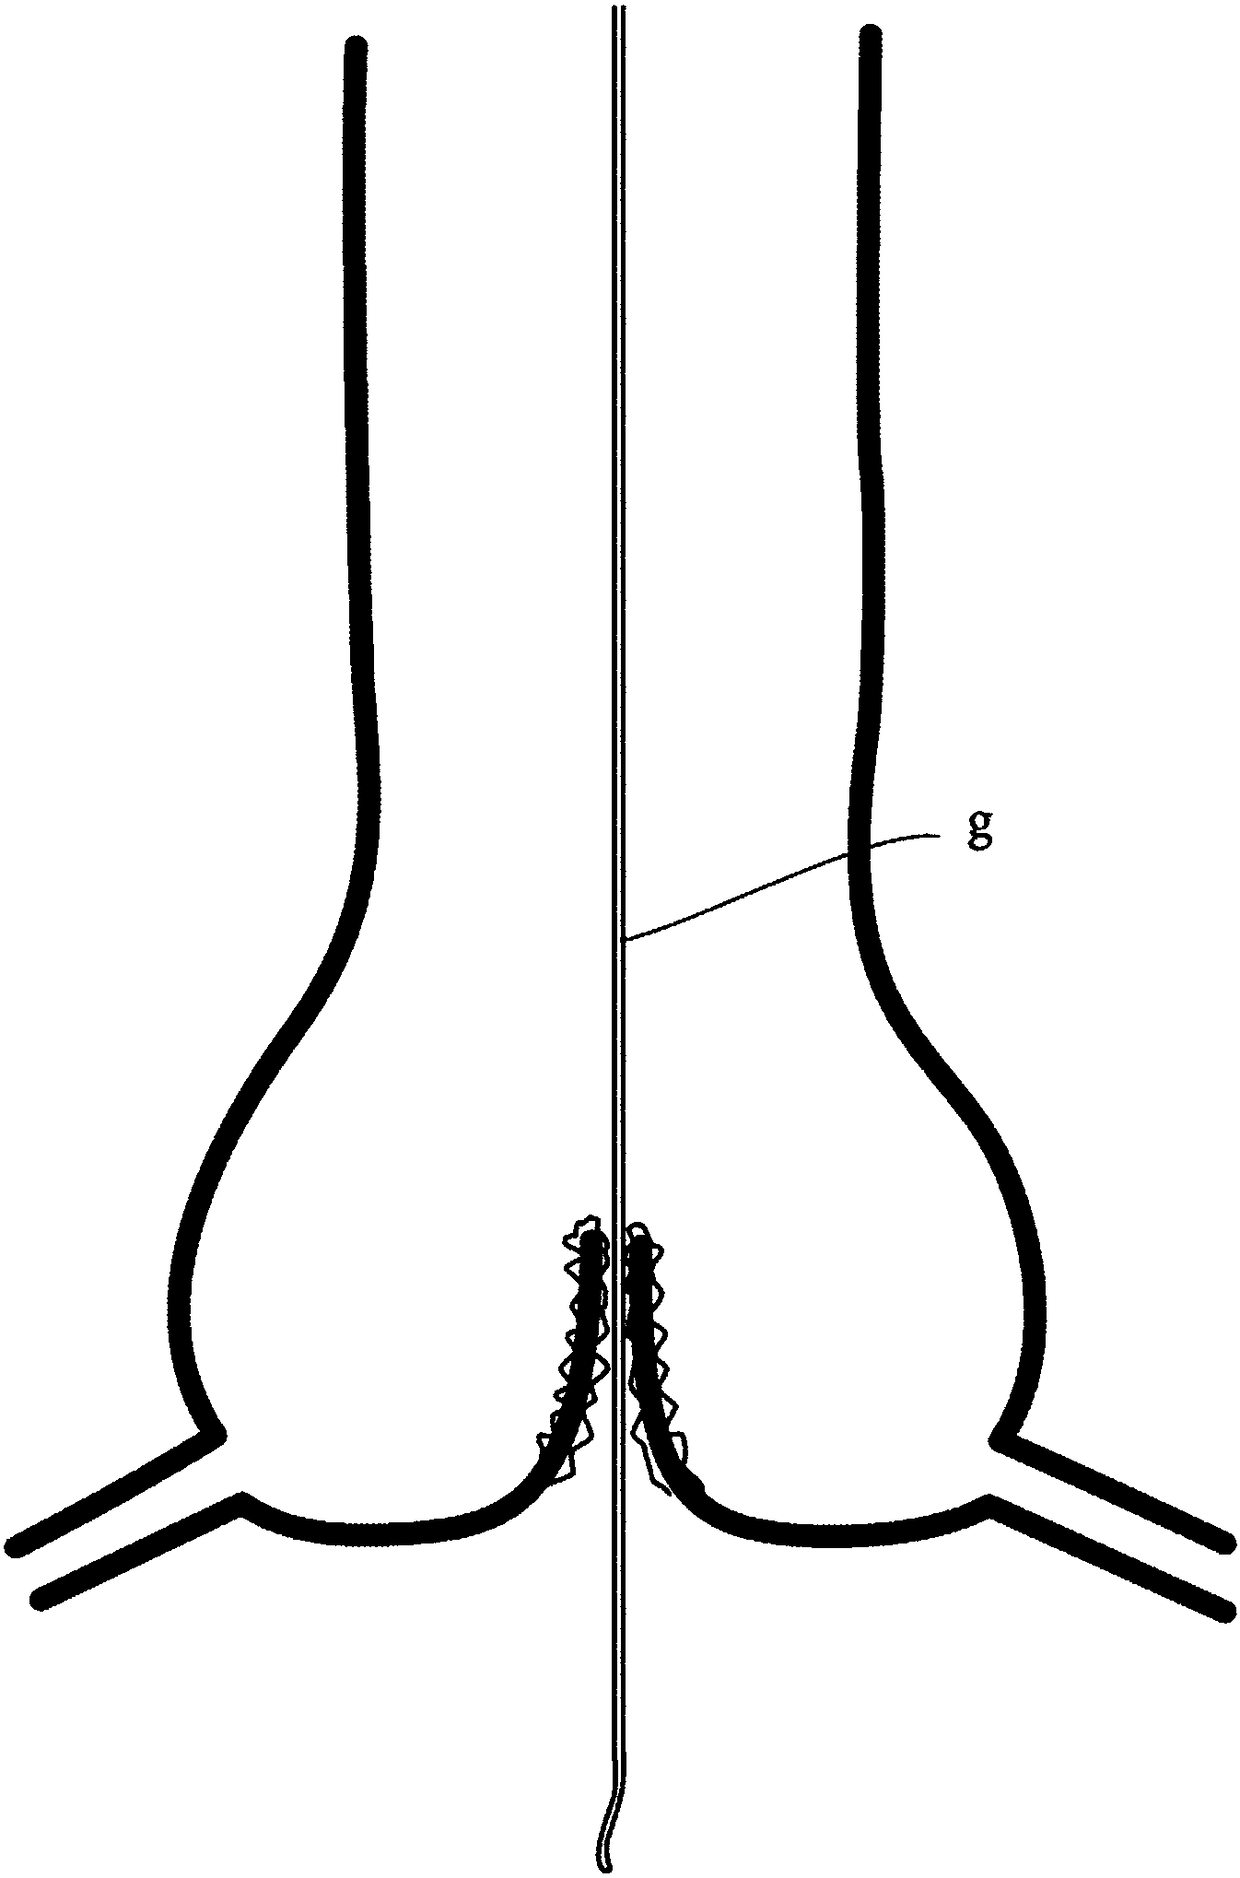 Device for transcatheter insertion into the aortic root at the sinotubular junction